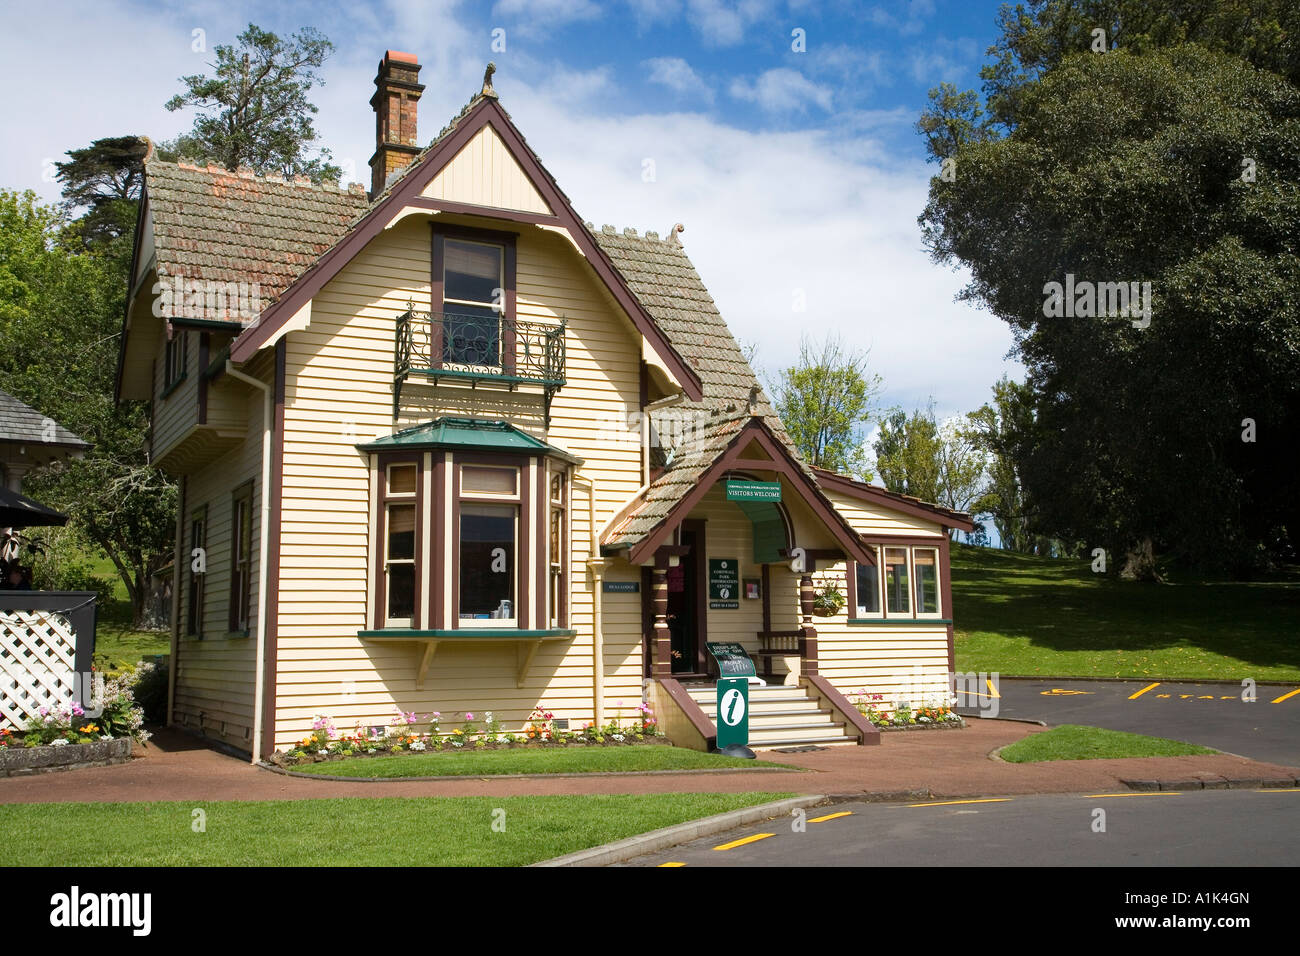 Huia Lodge Cornwall Park Auckland New Zealand North Island Banque D'Images